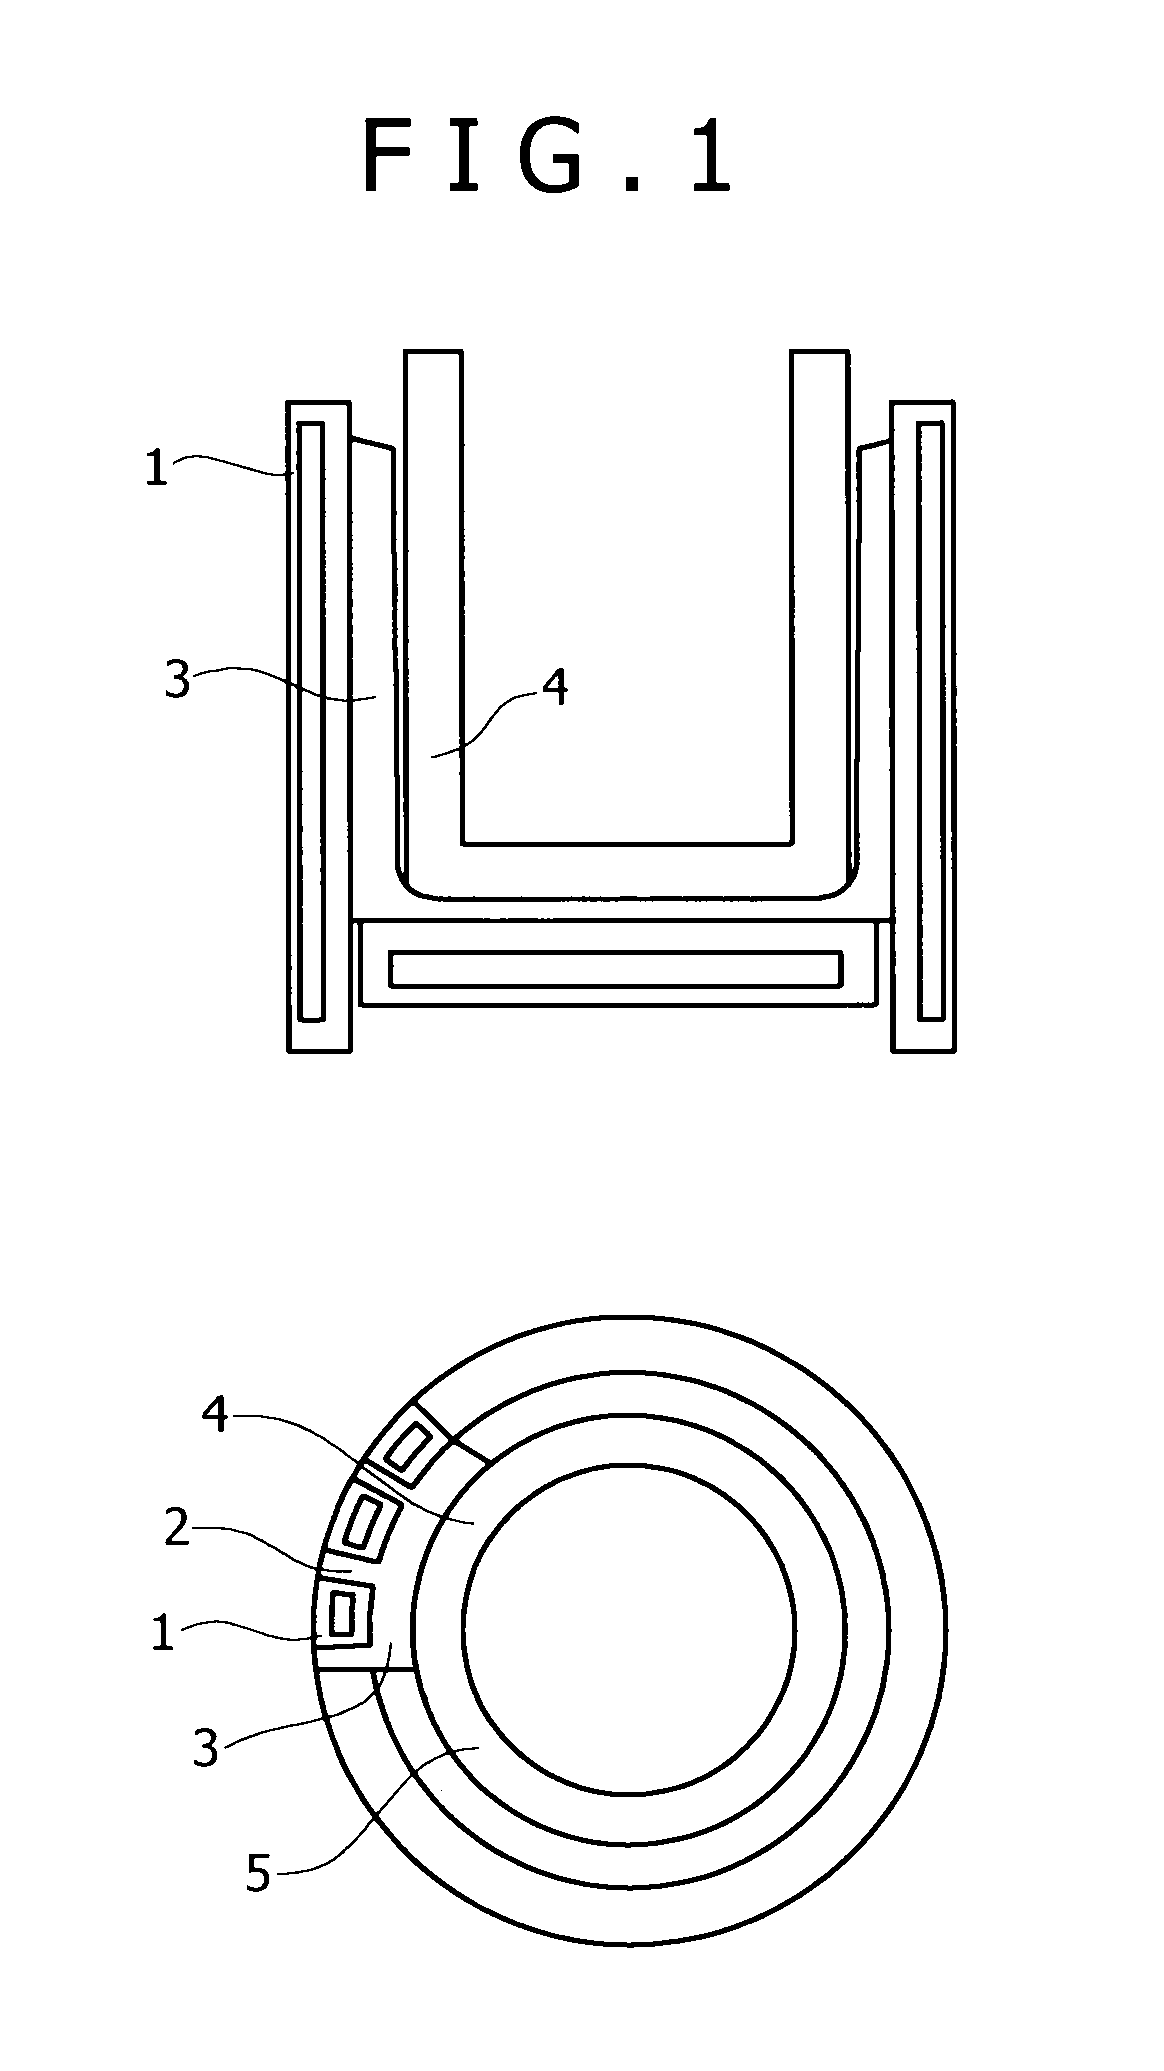 Induction melting apparatus employing halide type crucible, process for producing the crucible, method of induction melting, and process for producing ingot of ultrahigh-purity fe-, ni-, or co-based alloy material